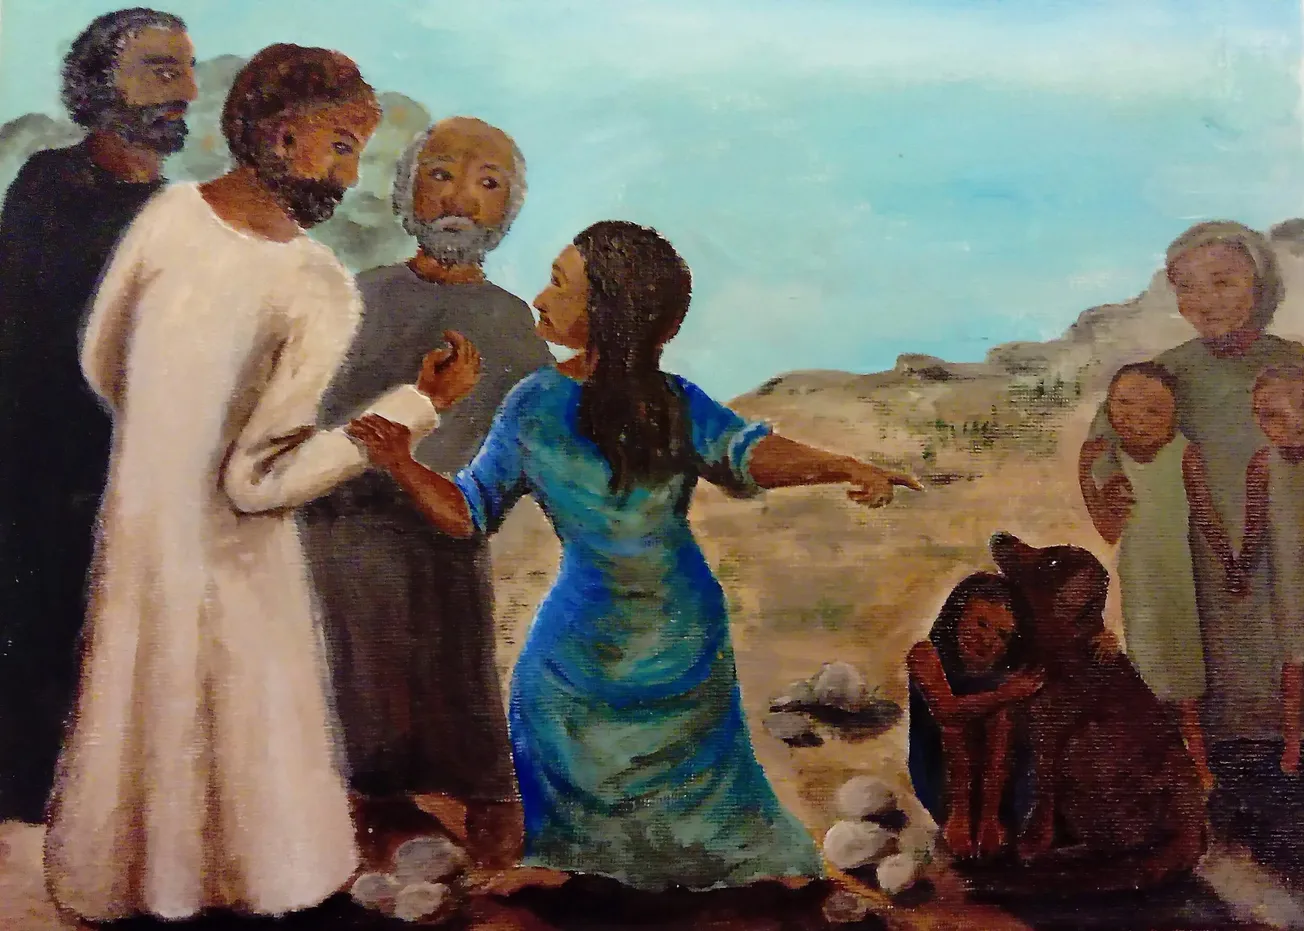 Jesus and the Gentile woman: a model for racial healing